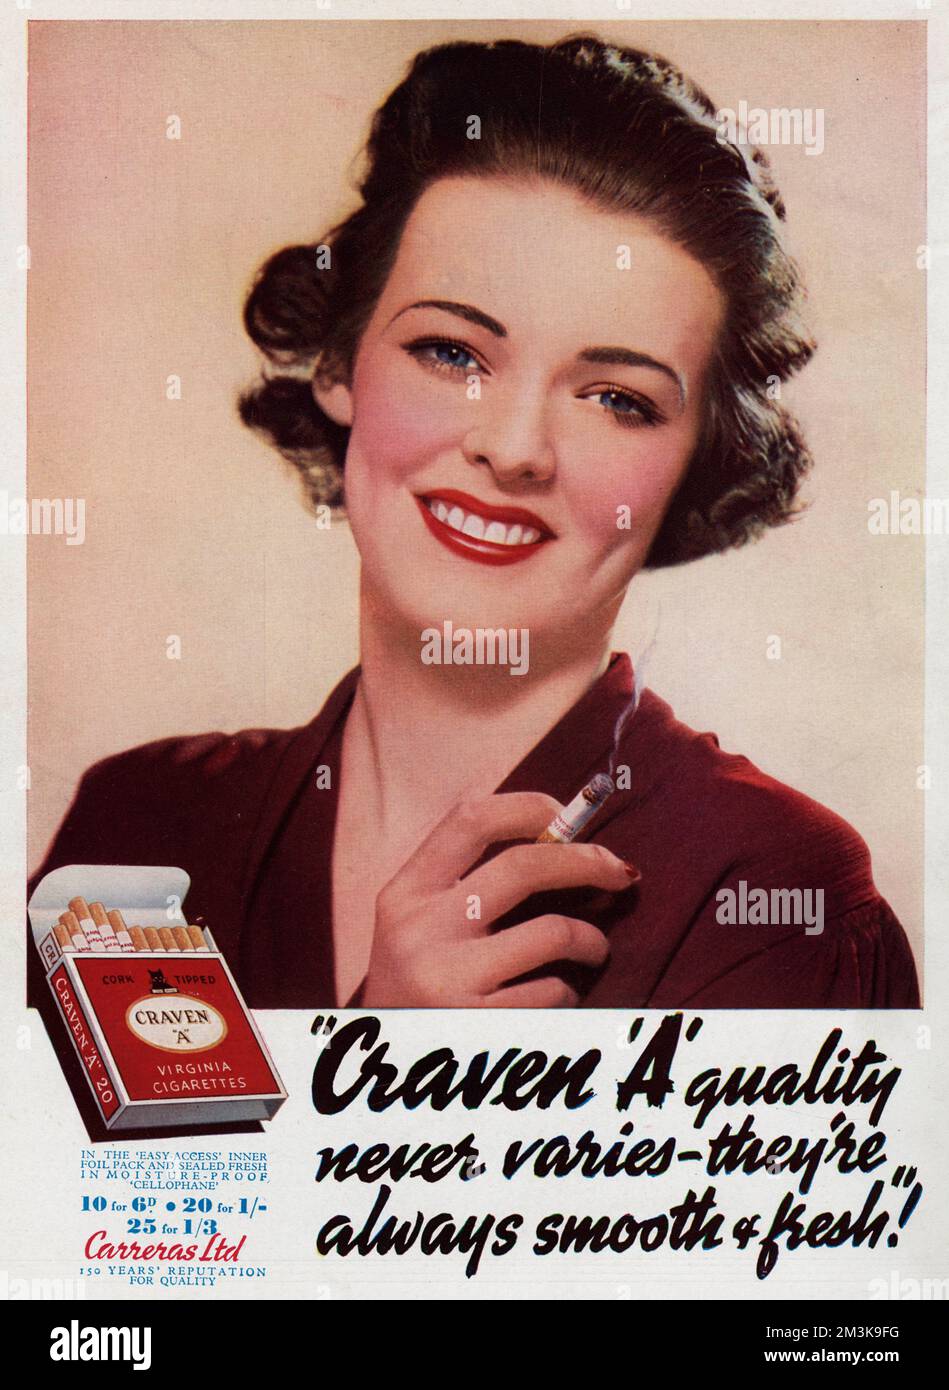 Craven A cigarettes - quality never varies they're always smooth and fresh!      Date: 1937 Stock Photo